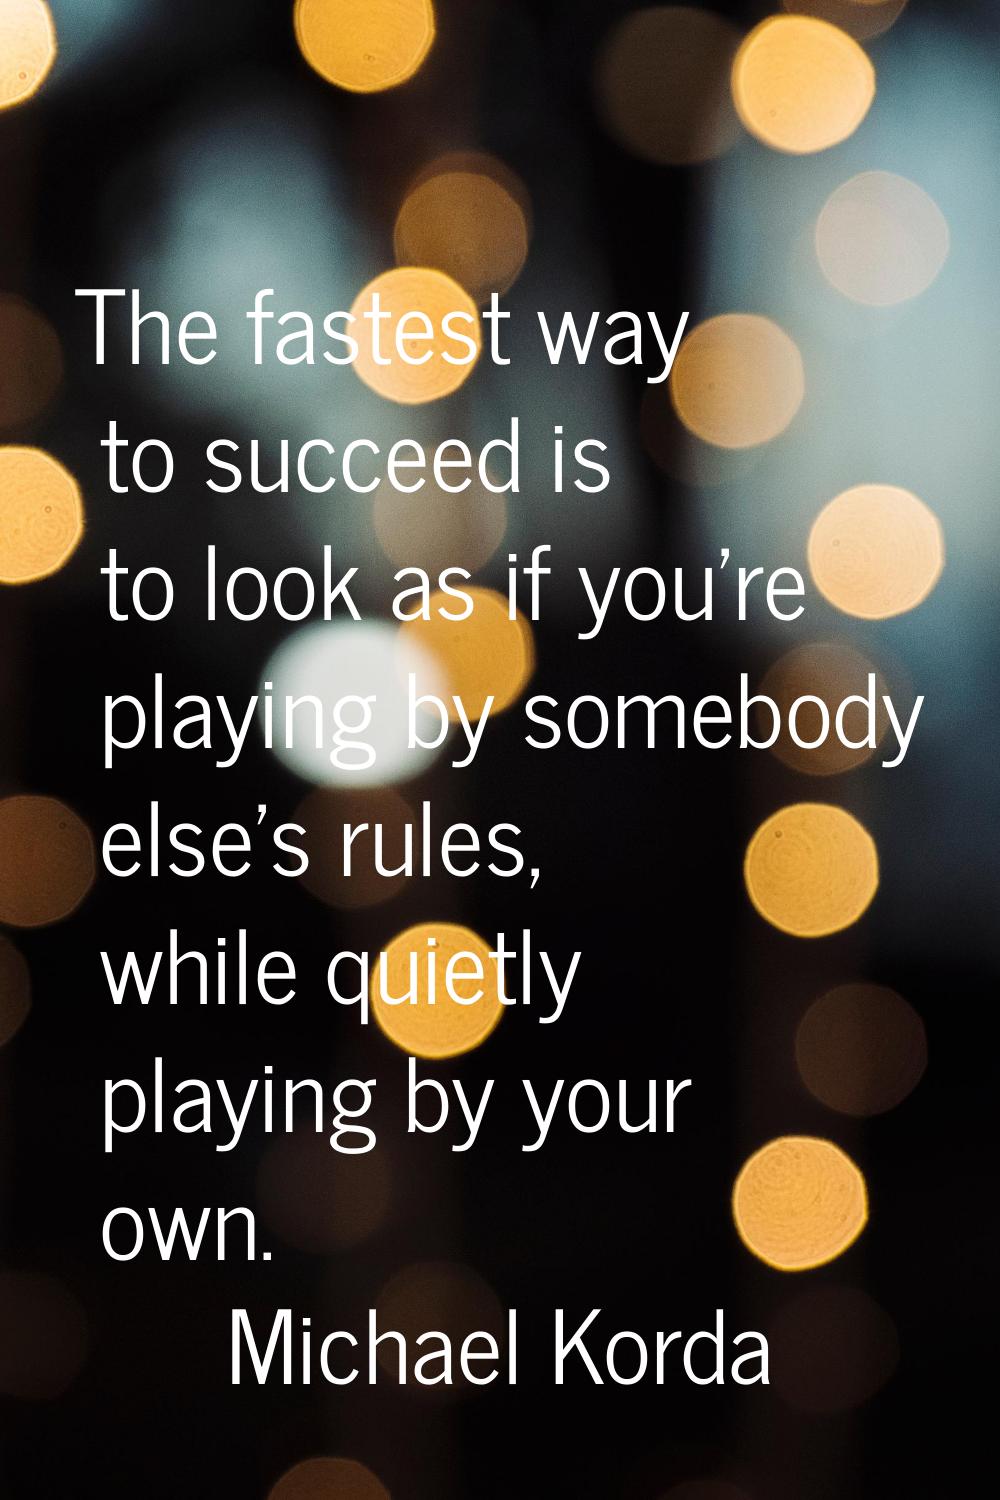 The fastest way to succeed is to look as if you're playing by somebody else's rules, while quietly 